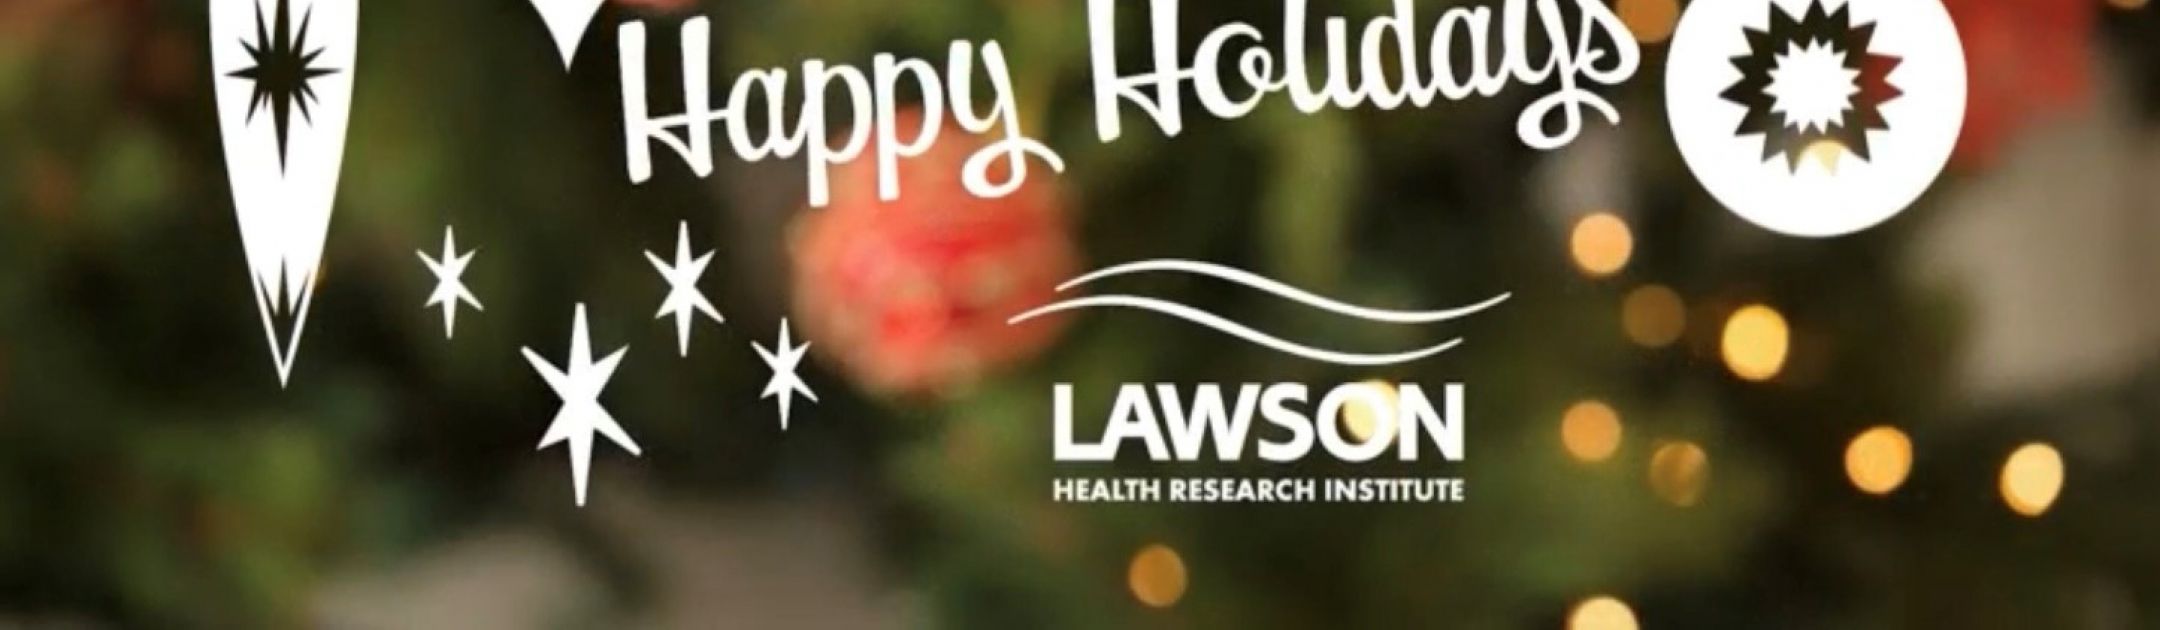 Happy Holidays from Lawson